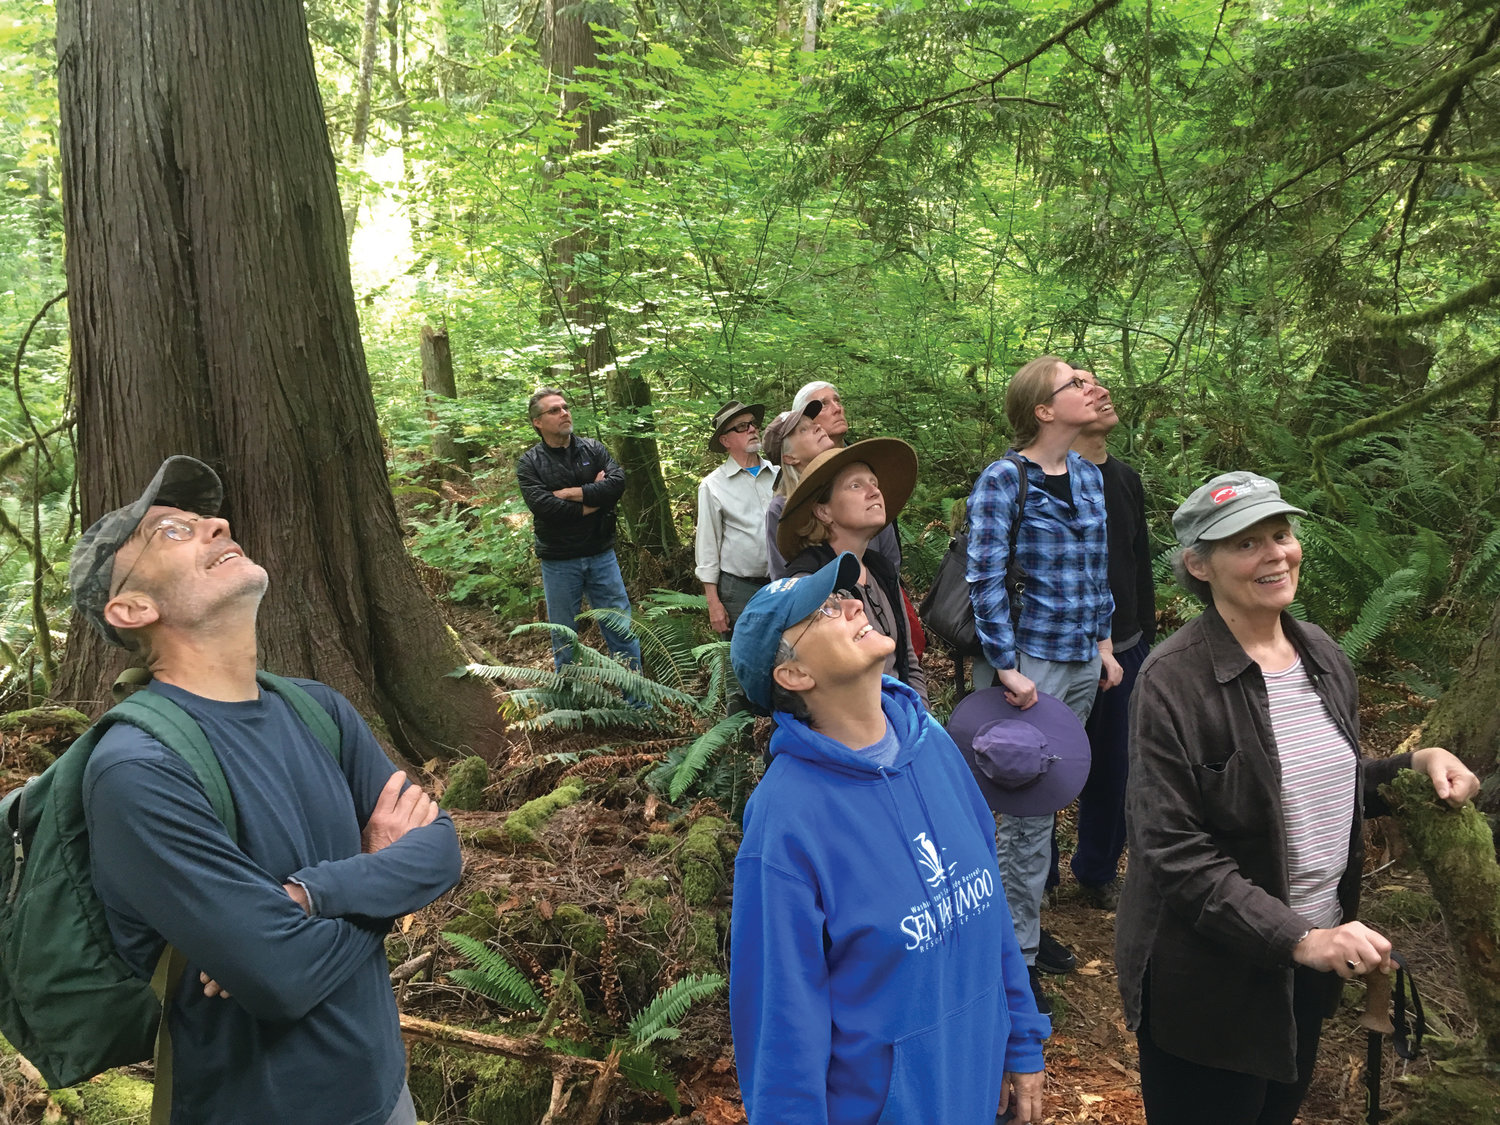 Admiring the trees, a group of supporters learn about a 21-acre forest addition to NWI’s Tarboo Wildlife Preserve, protected with easements held by the U.S. Navy and Jefferson Land Trust.